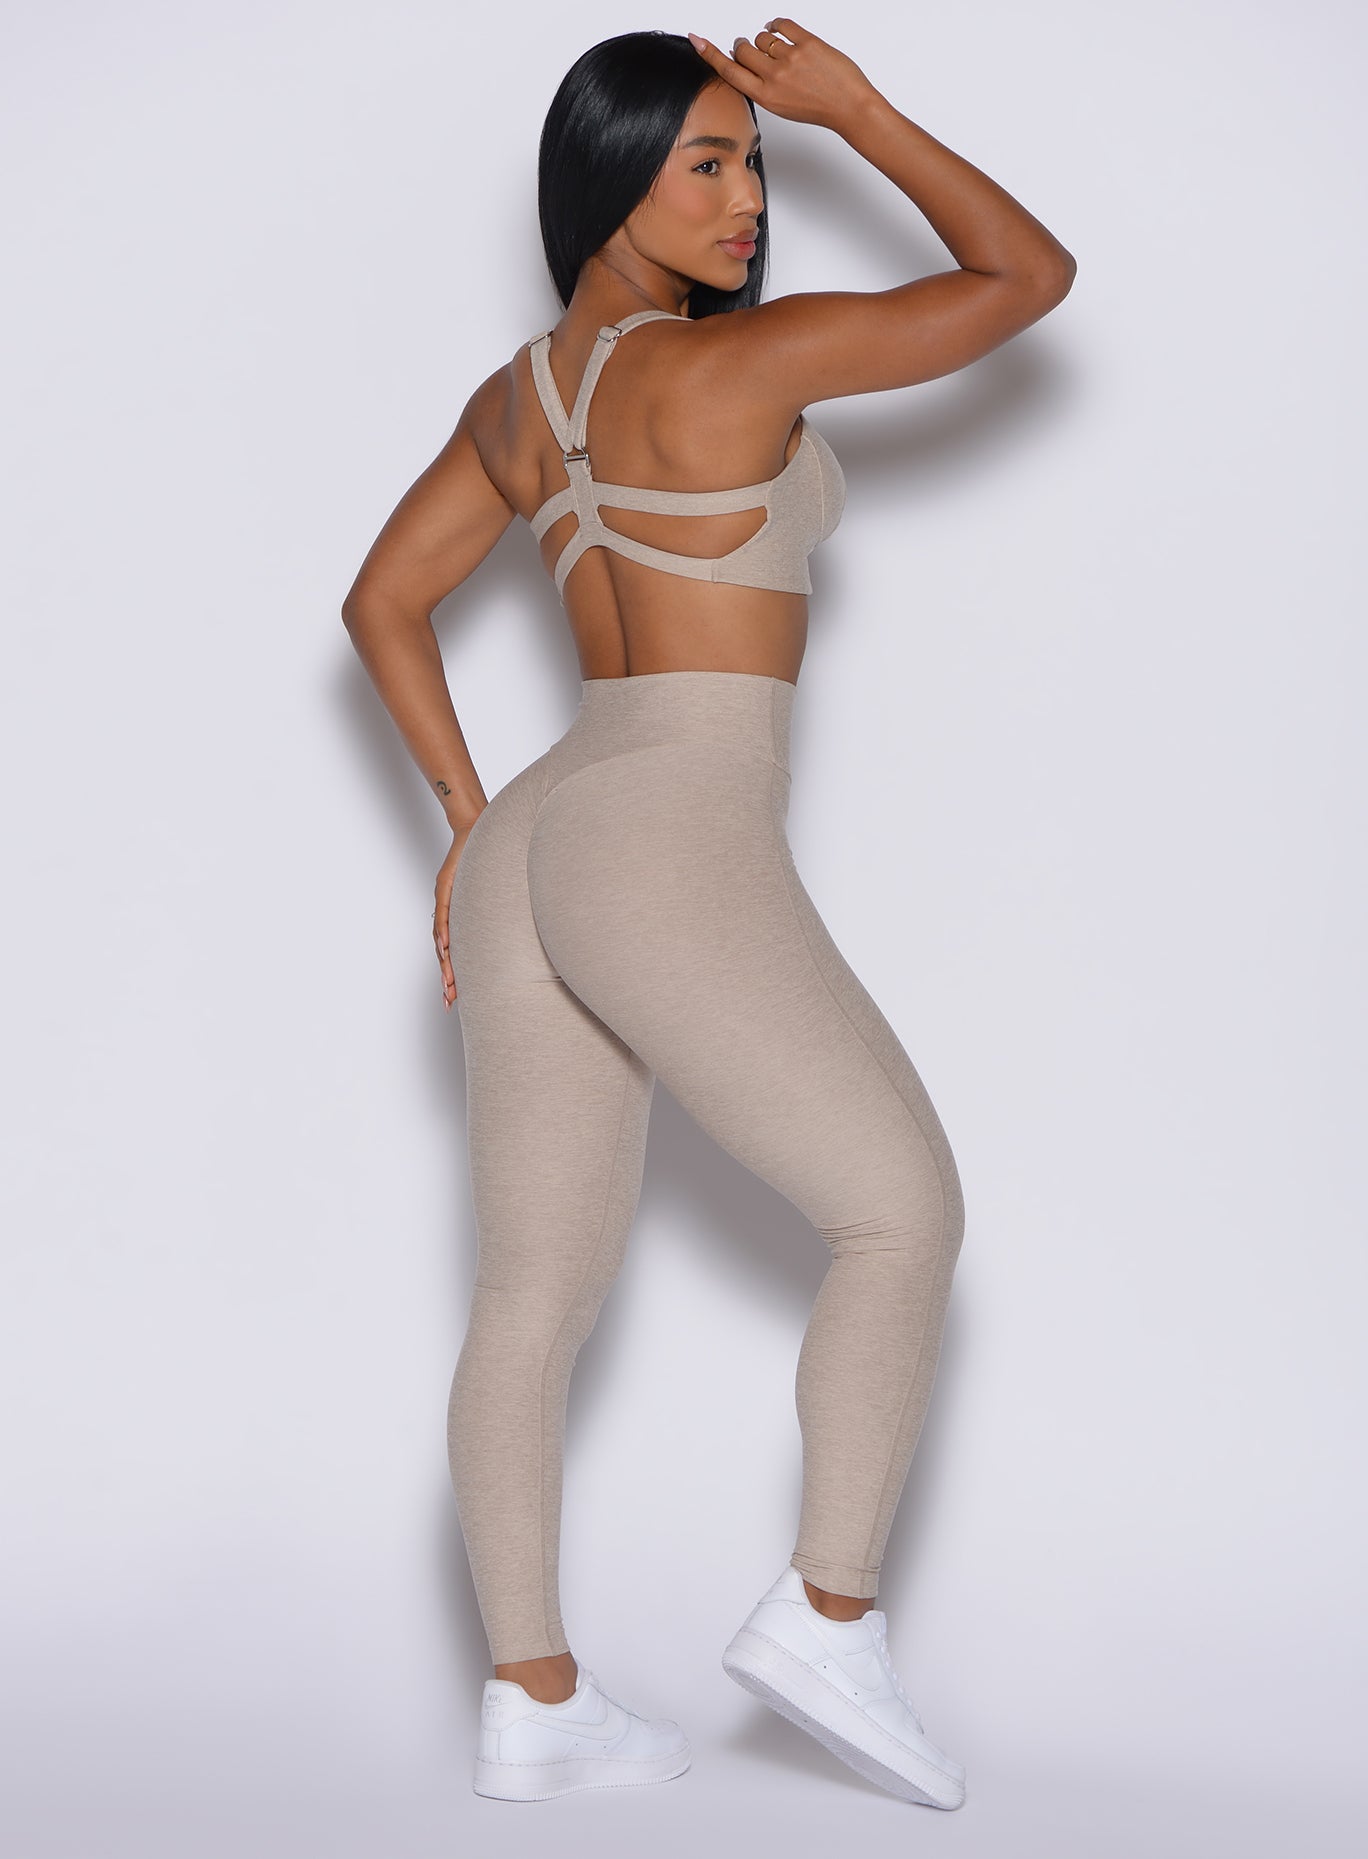 back profile of model angled to her right wearing the Movement Leggings in Taupe color and a matching Sports Bra 